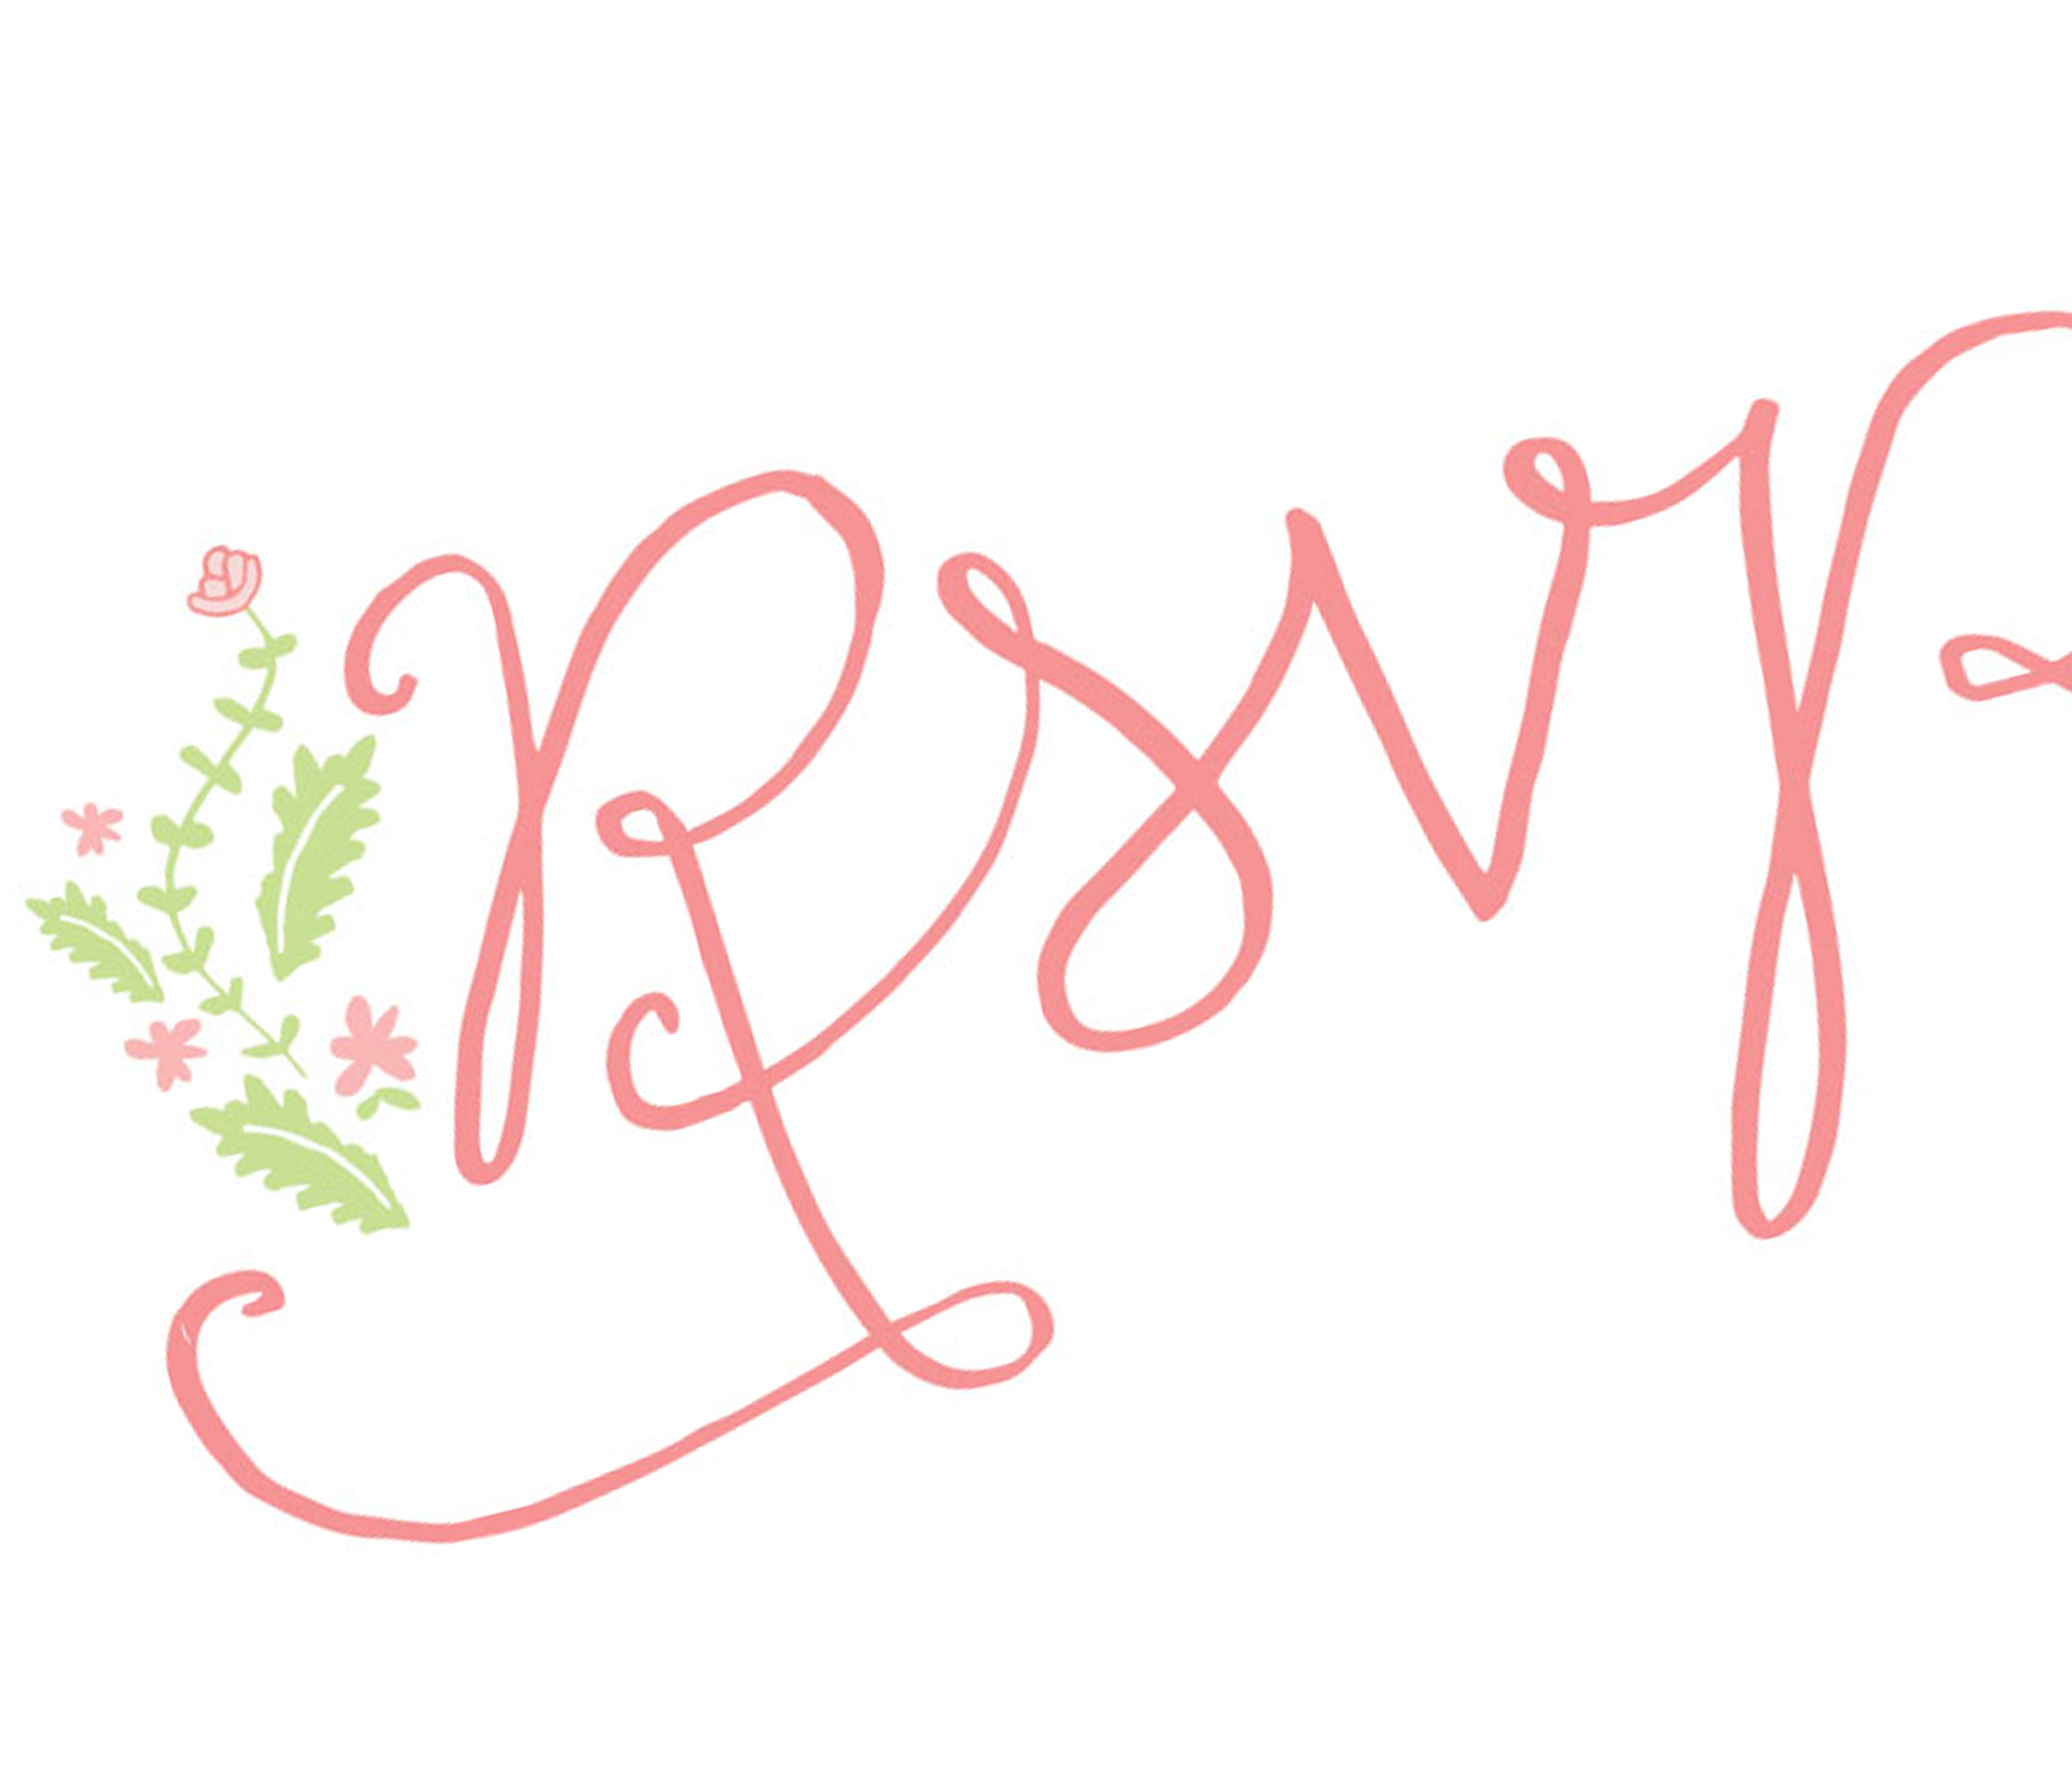 Free Rustic RSVP Cliparts, Download Free Rustic RSVP Clipart